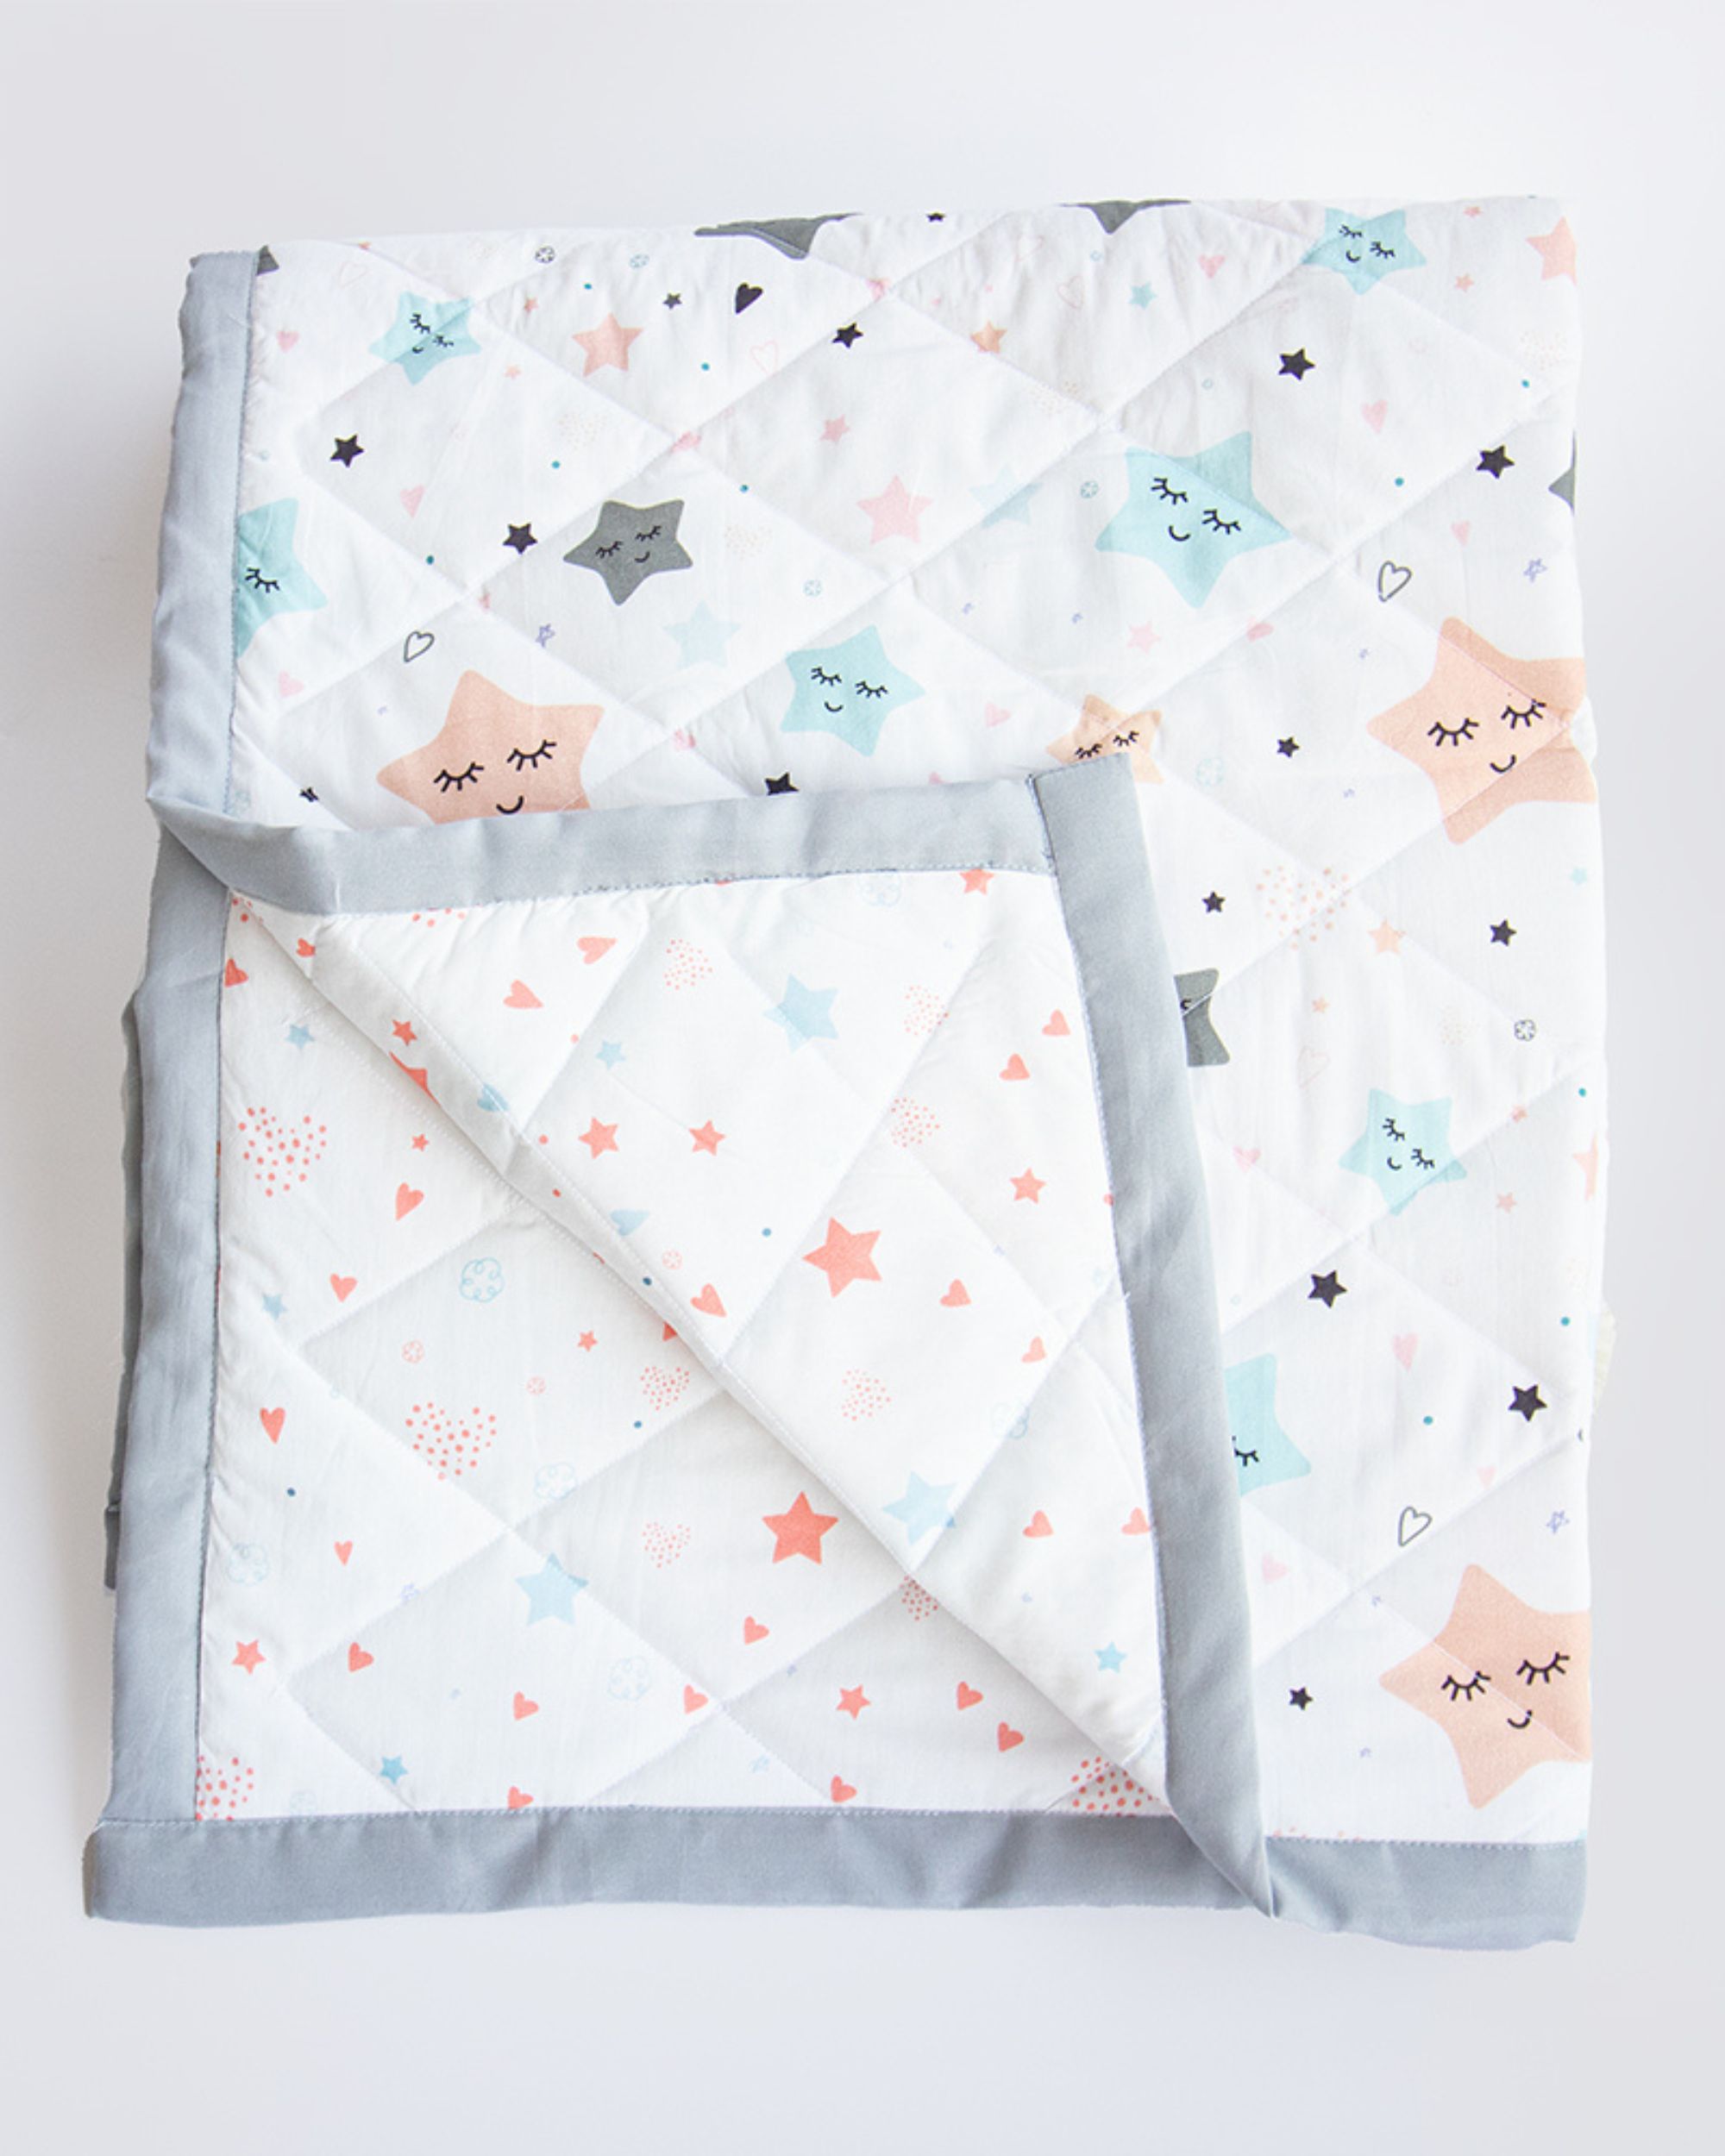 Twinkly stars themed reversible quilt